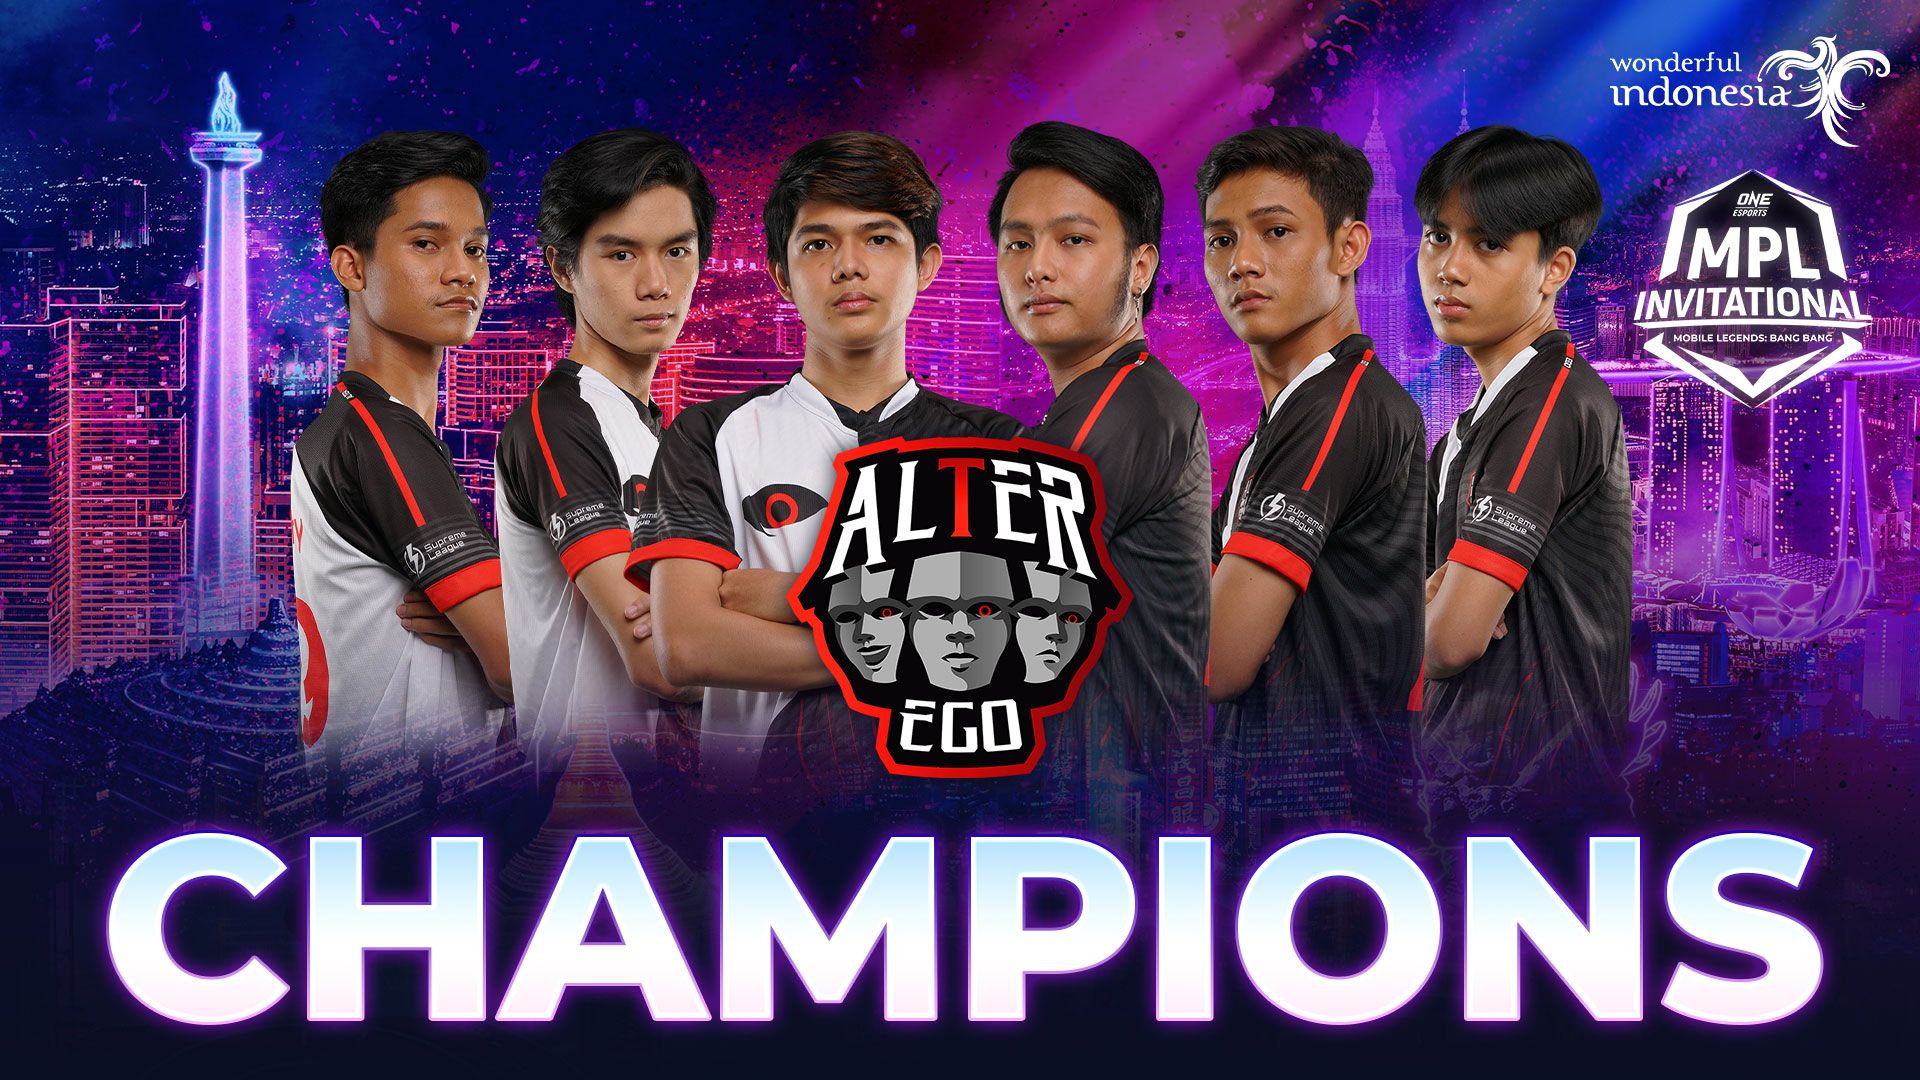 Alter Ego wins the ONE Esports MPL Invitational with a perfect 11